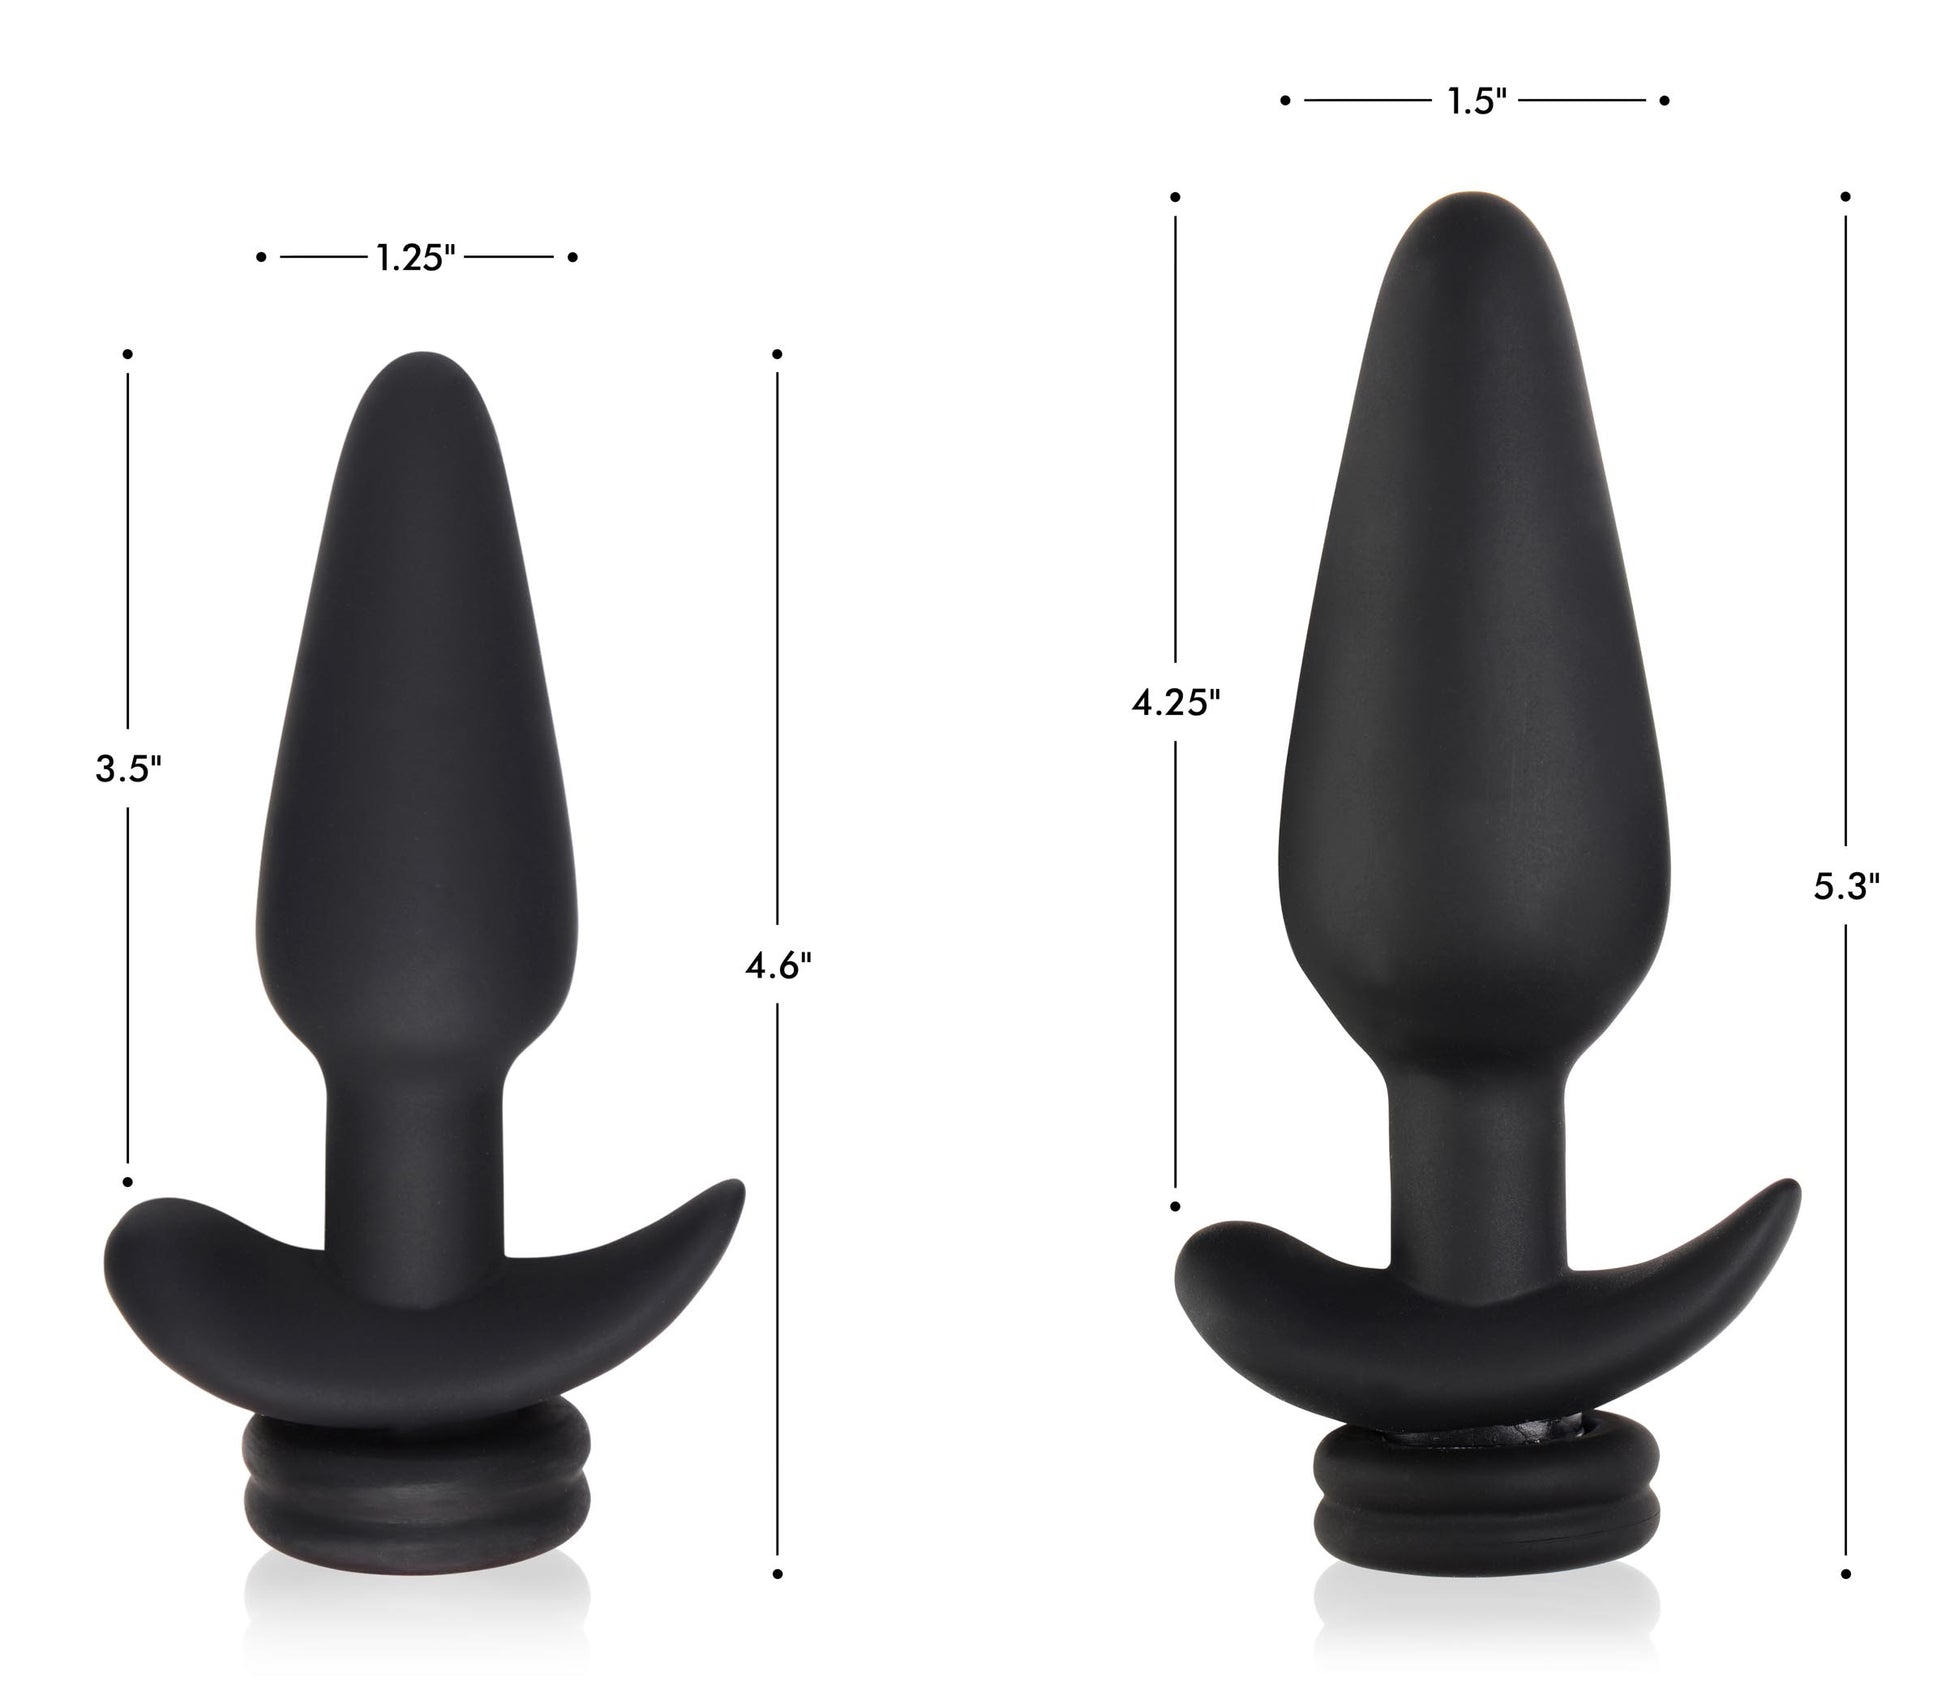 Large Vibrating Anal Plug with Interchangeable Bunny Tail - White - UABDSM